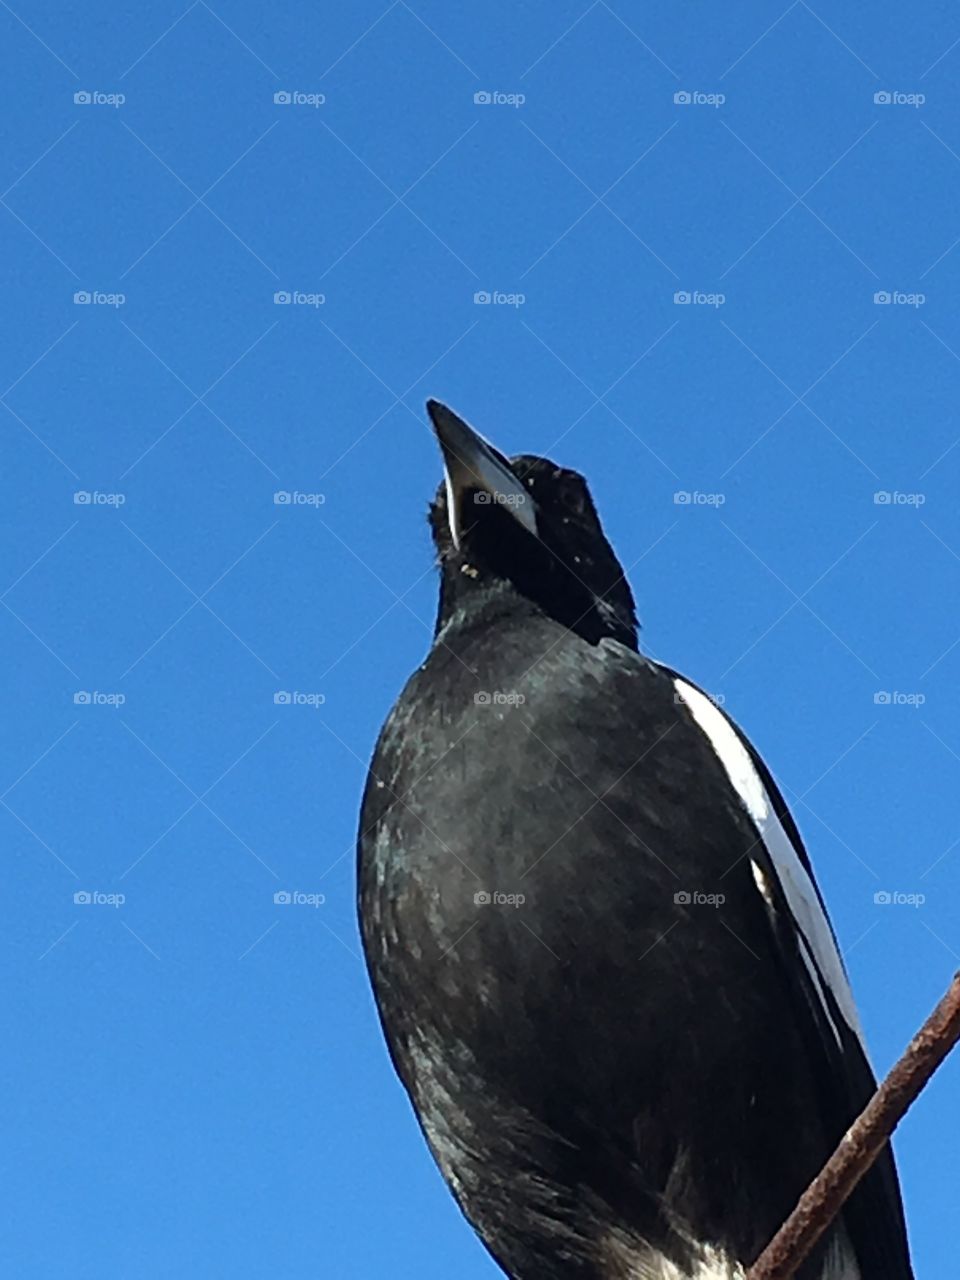 Closeup view large magpie wild bird, upper body and head beautifully contrasted against a vivid clear deep blue sky